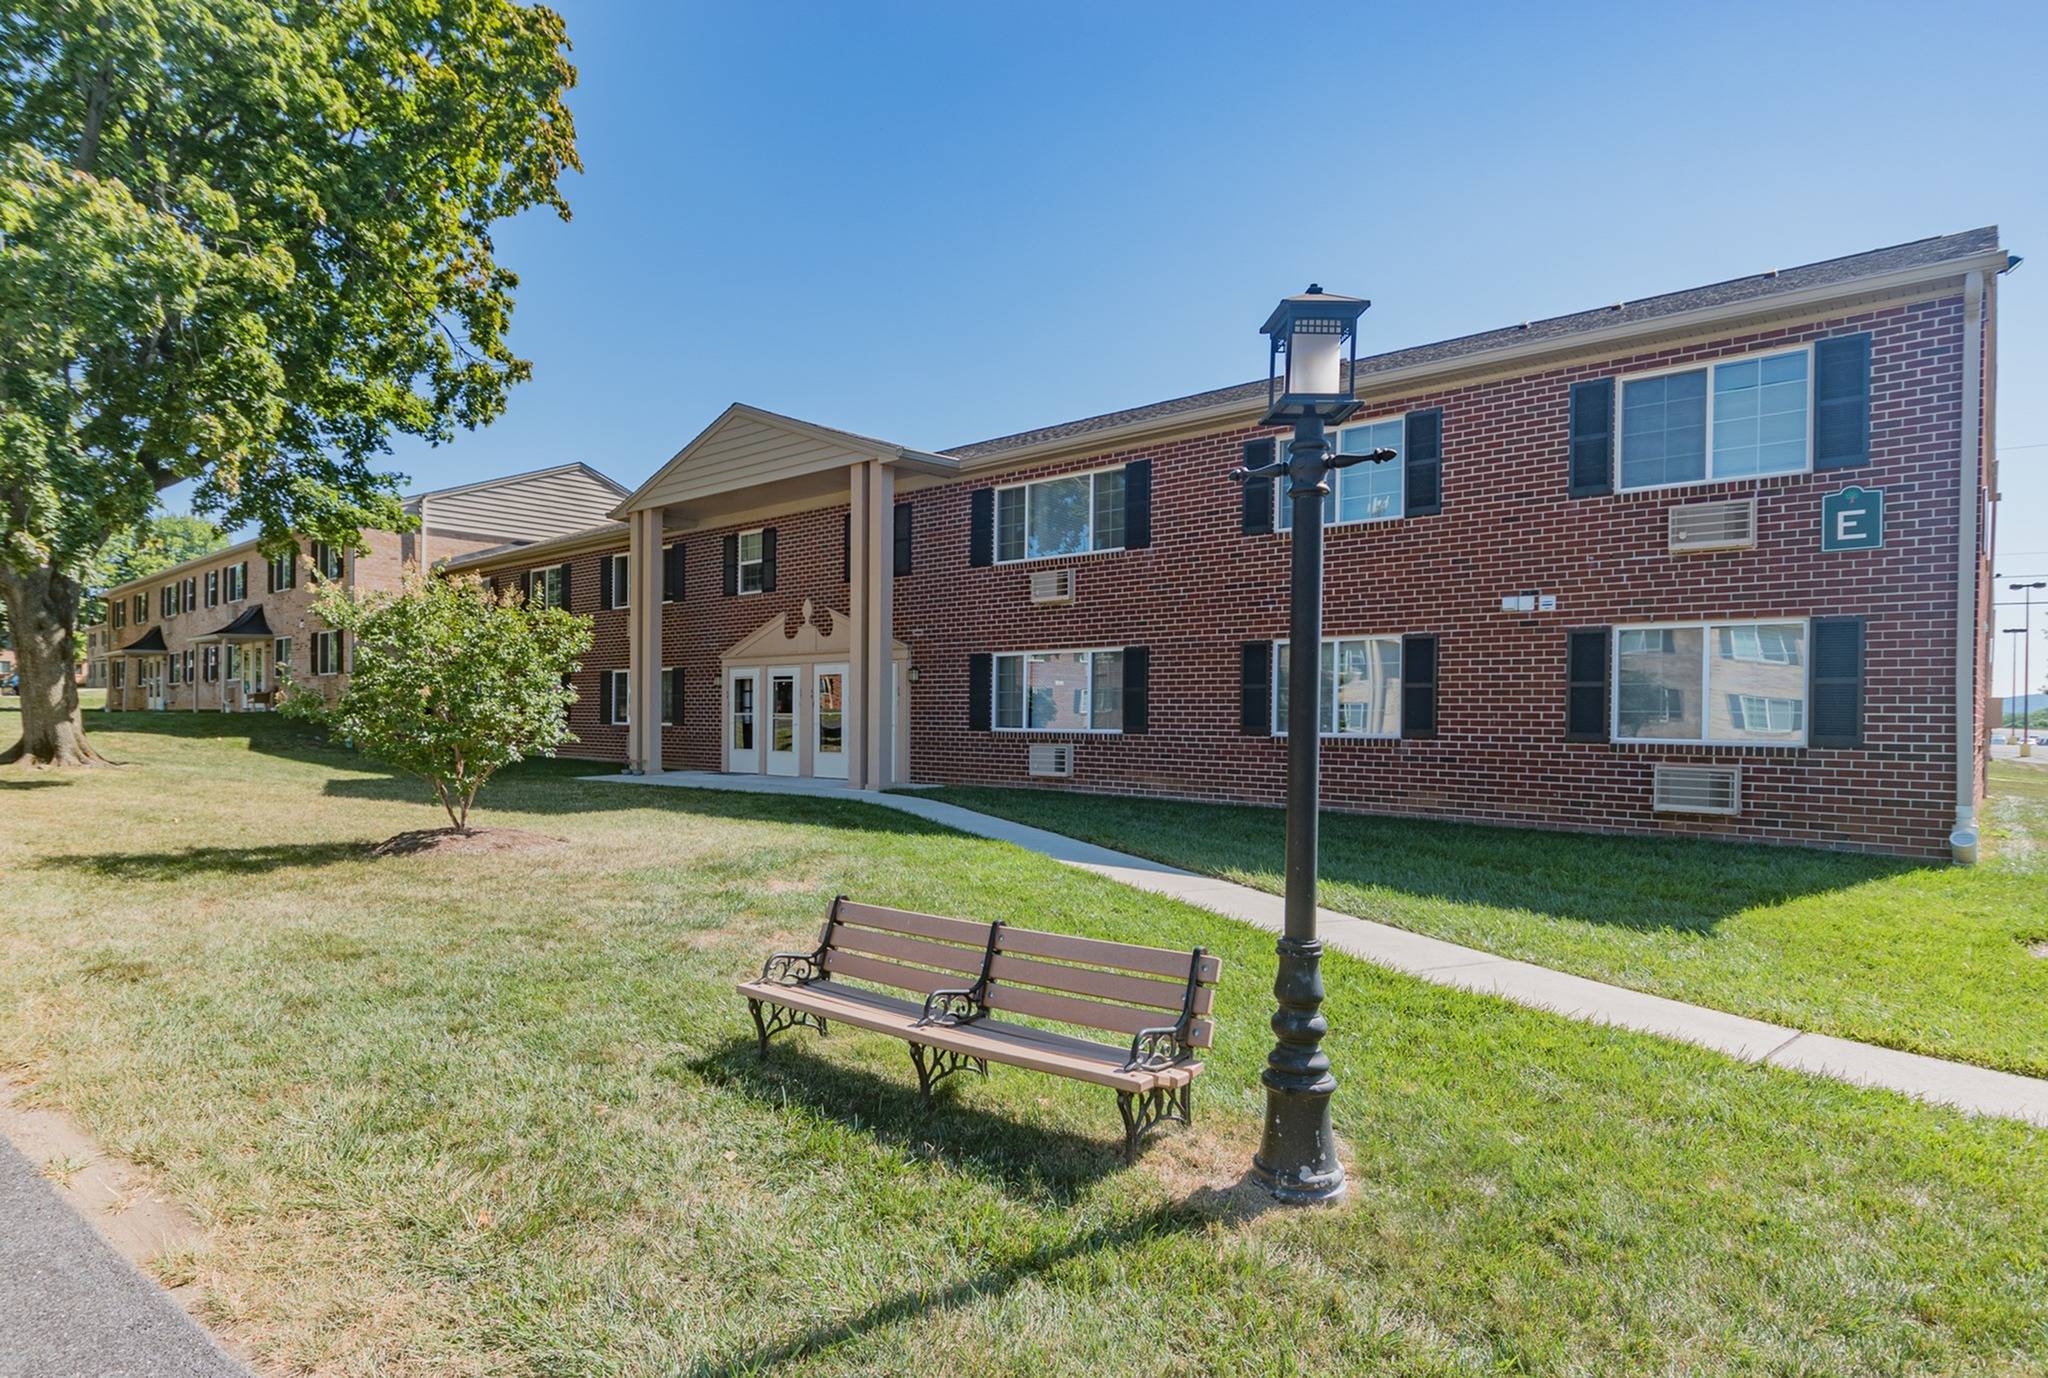 Woodland Plaza Apartments exterior with a pathway leading to apartment entrance